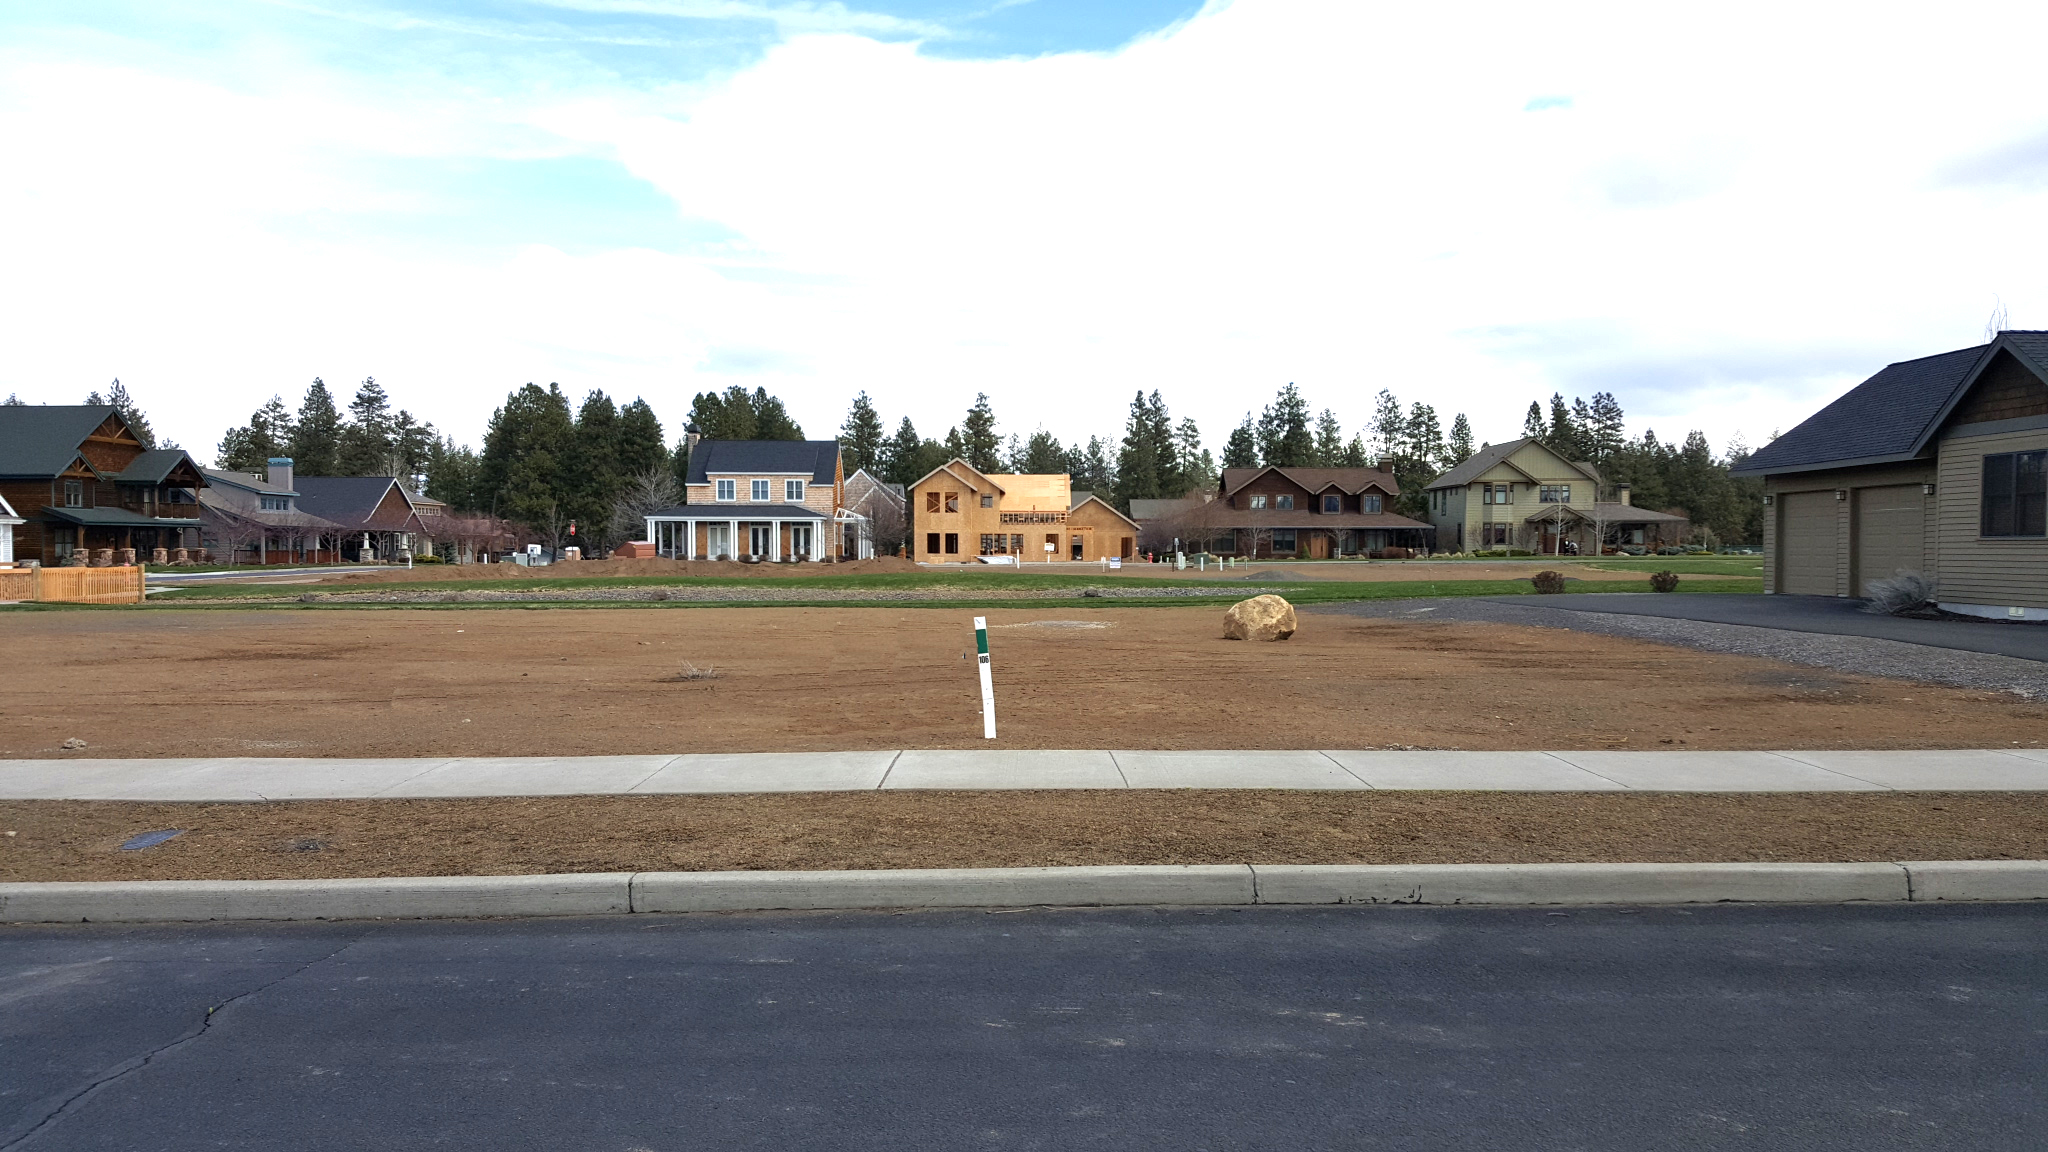 Photo of available homesite for New Homes in Sisters Oregon, Pine Meadows, by Gertz Fine Homes